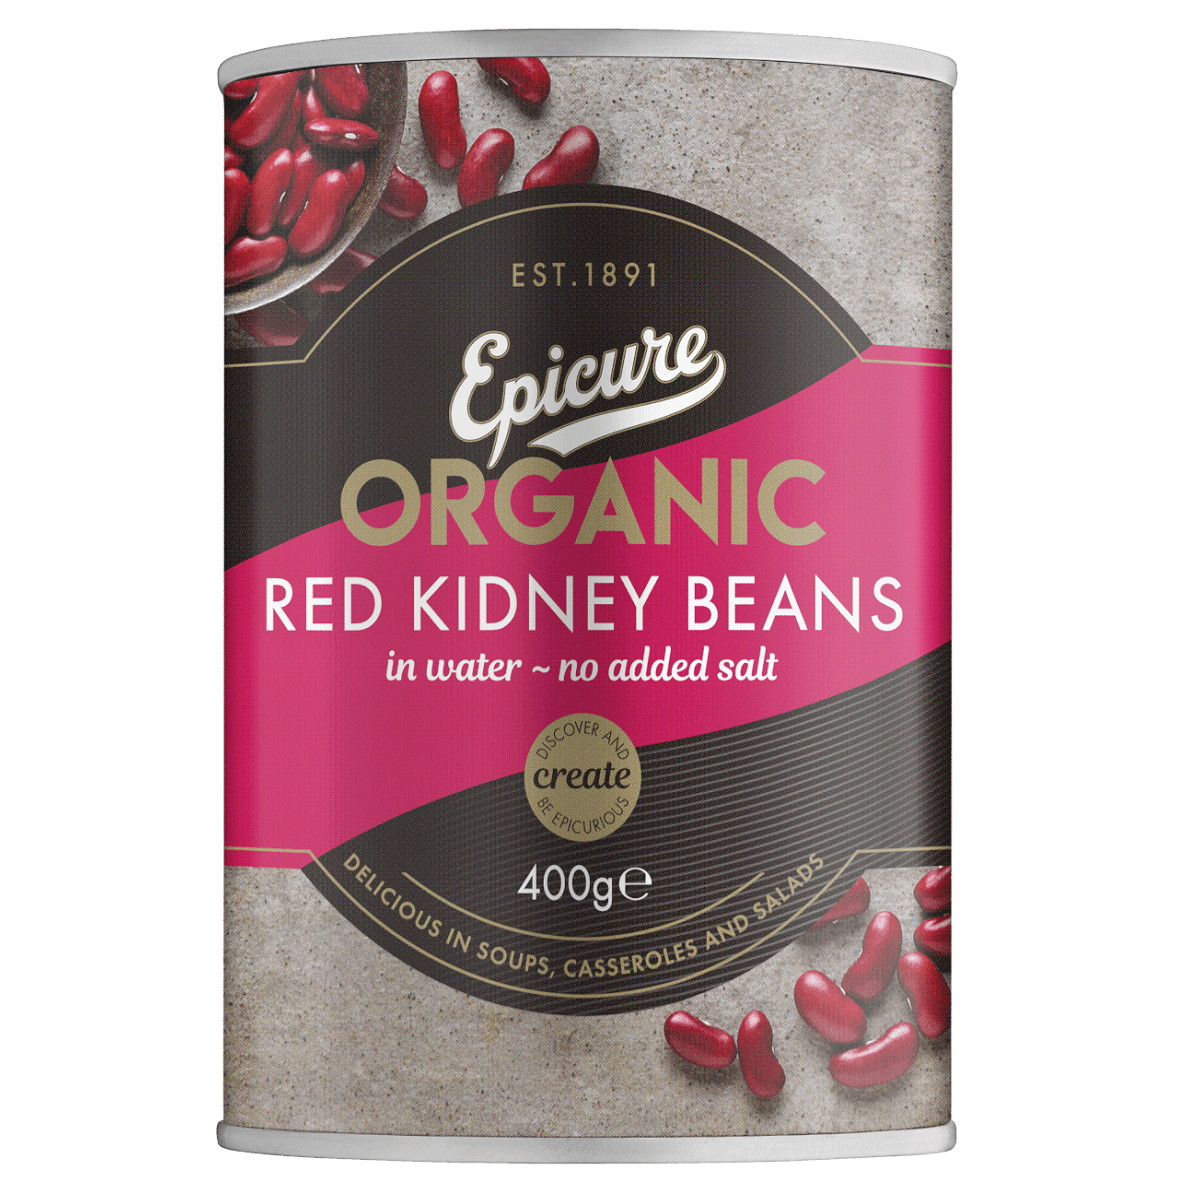 Epicure Organic Red Kidney Beans in water no added salt 400g